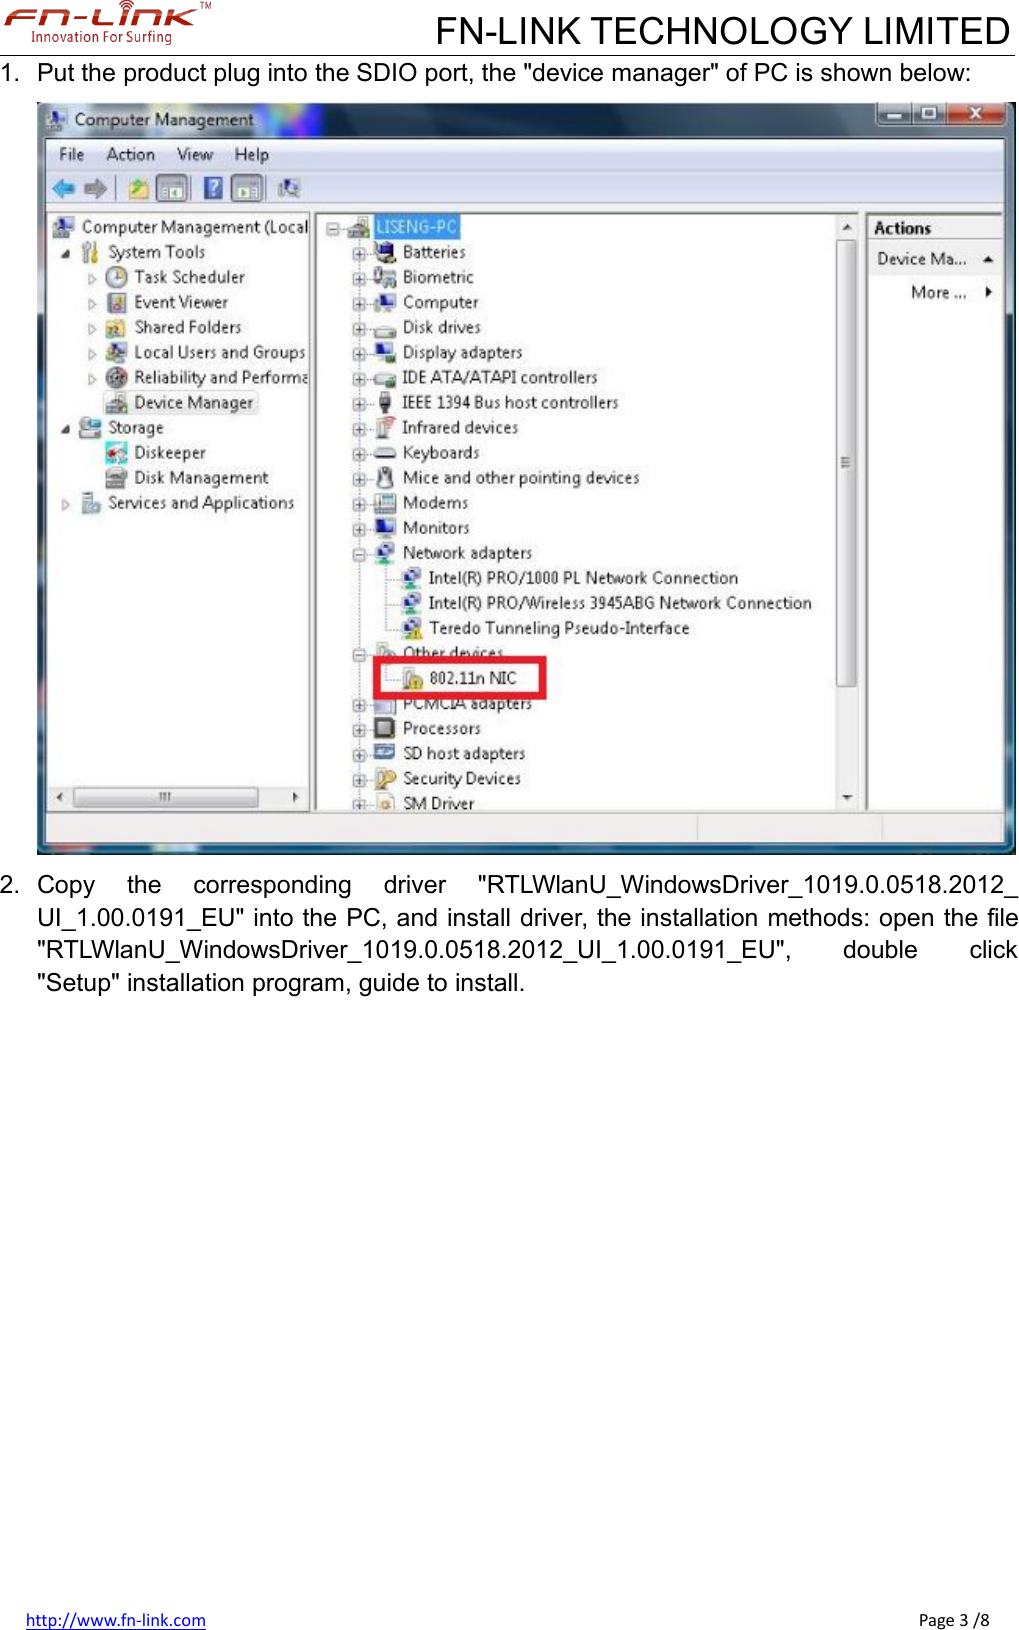 FN-LINK TECHNOLOGY LIMITEDhttp://www.fn-link.com Page 3 /81. Put the product plug into the SDIO port, the &quot;device manager&quot; of PC is shown below:2. Copy the corresponding driver &quot;RTLWlanU_WindowsDriver_1019.0.0518.2012_UI_1.00.0191_EU&quot; into the PC, and install driver, the installation methods: open the file&quot;RTLWlanU_WindowsDriver_1019.0.0518.2012_UI_1.00.0191_EU&quot;, double click&quot;Setup&quot; installation program, guide to install.